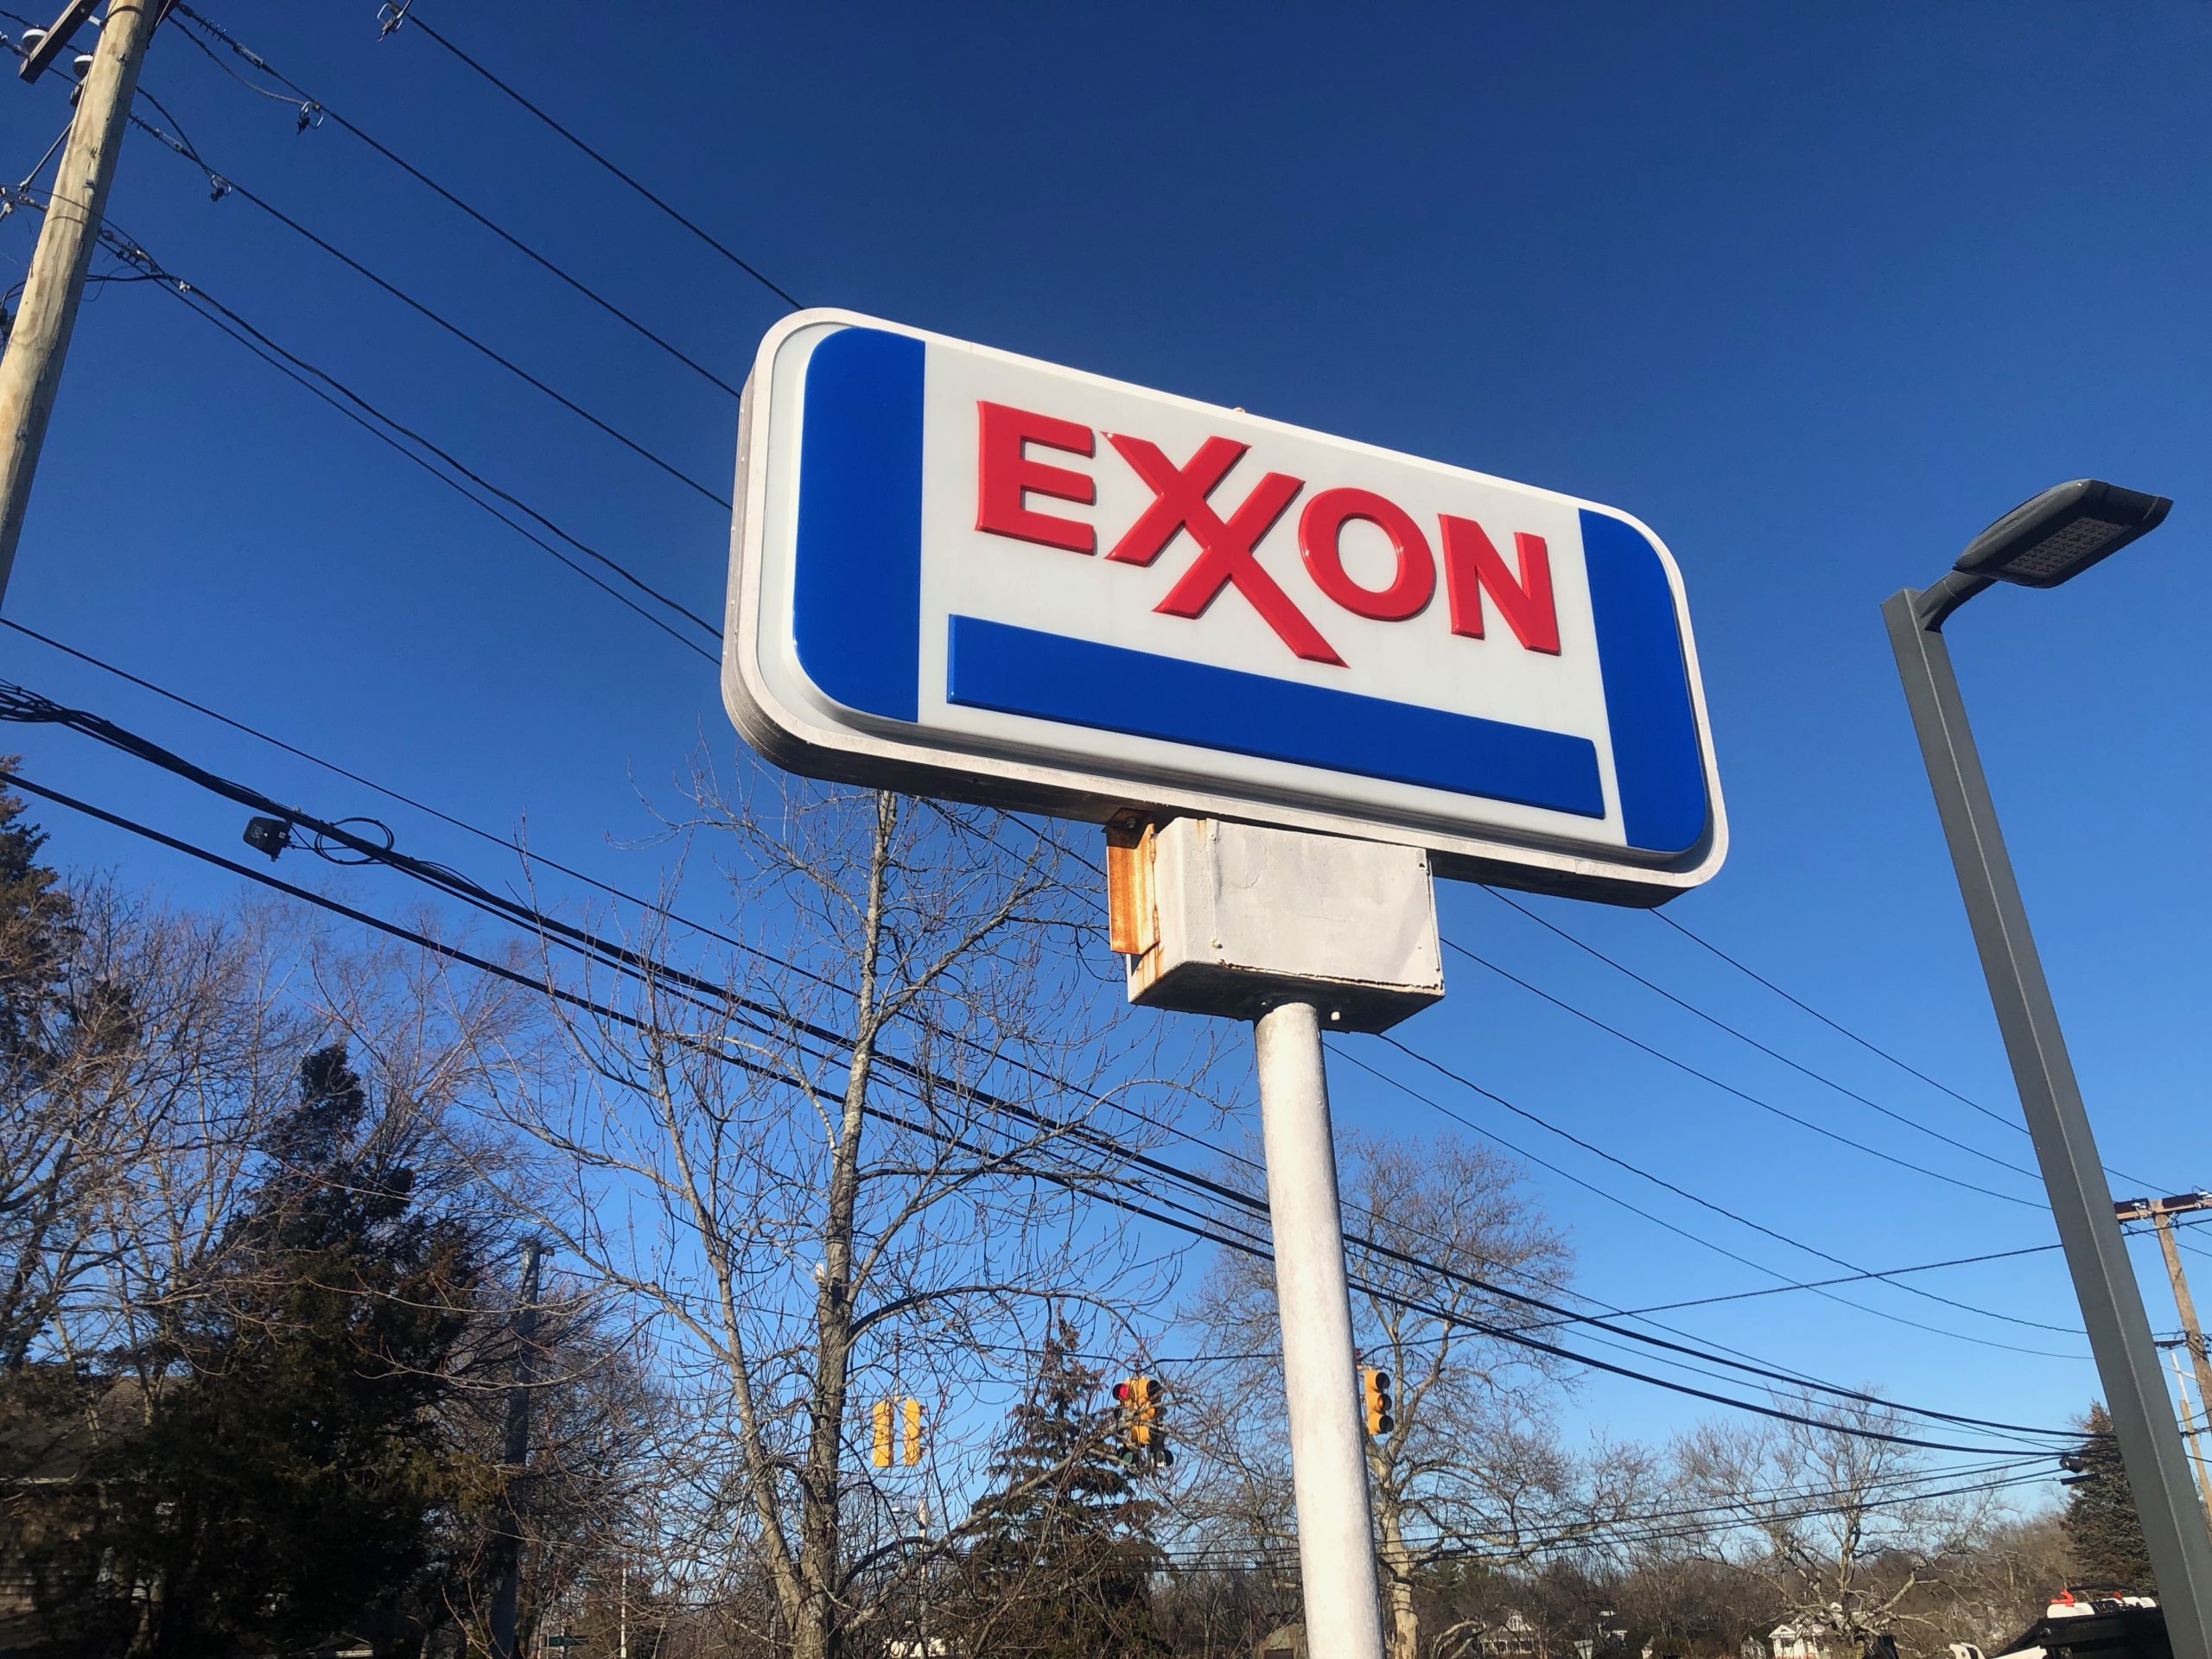 Even as JPMorgan Chase has recently signed onto the Net Zero Banking Alliance, the company continues to fund EXXON’s massive expansion of oil and gas extraction. JENNY NOBLE